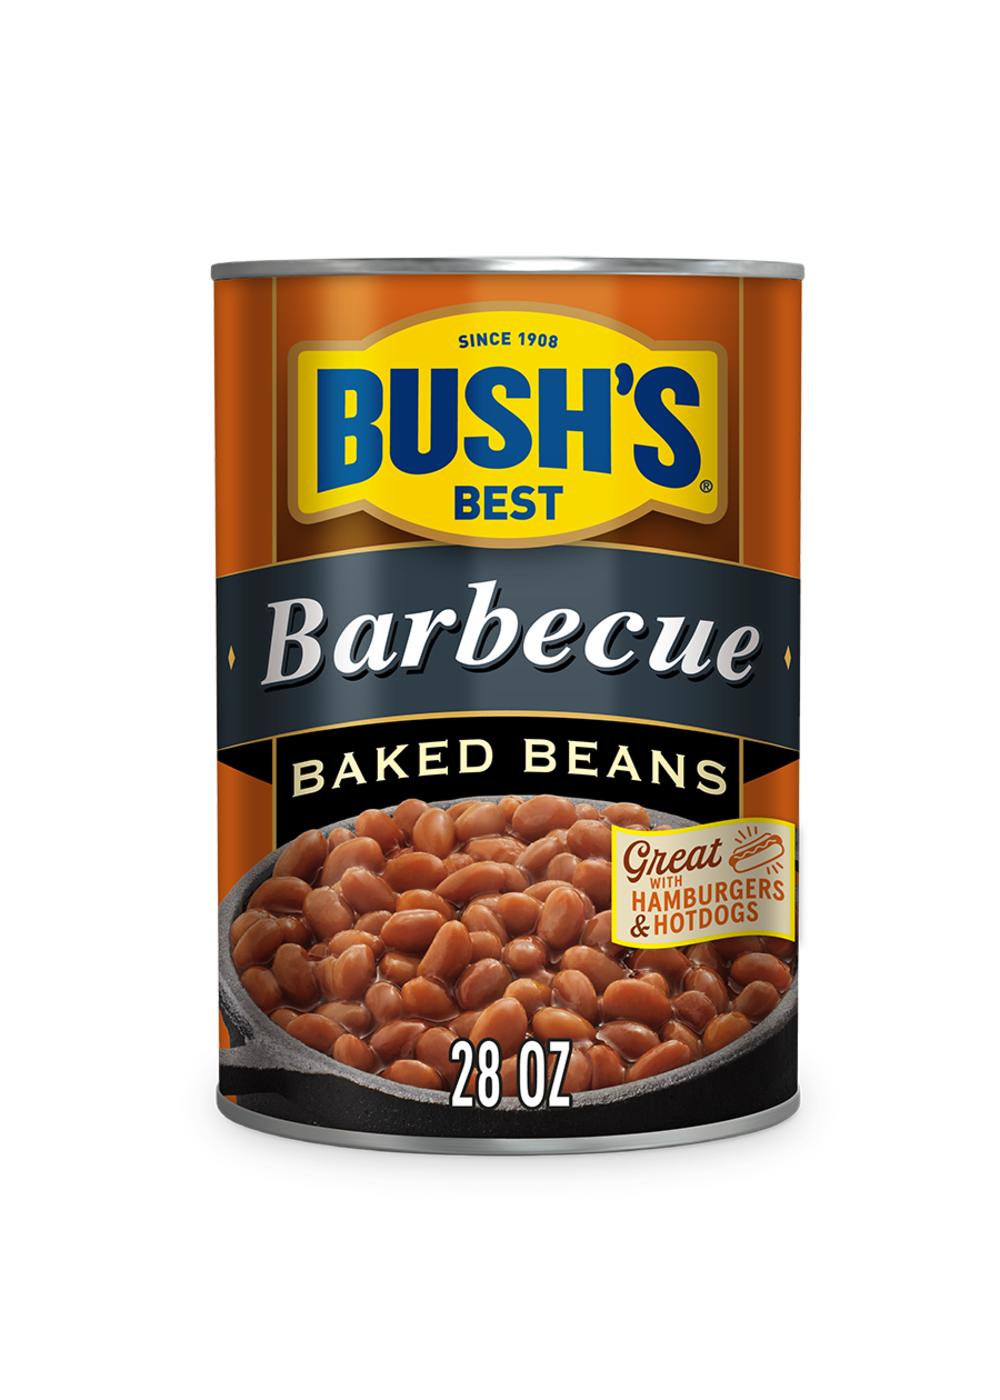 Bush's Best Barbecue Baked Beans; image 1 of 3